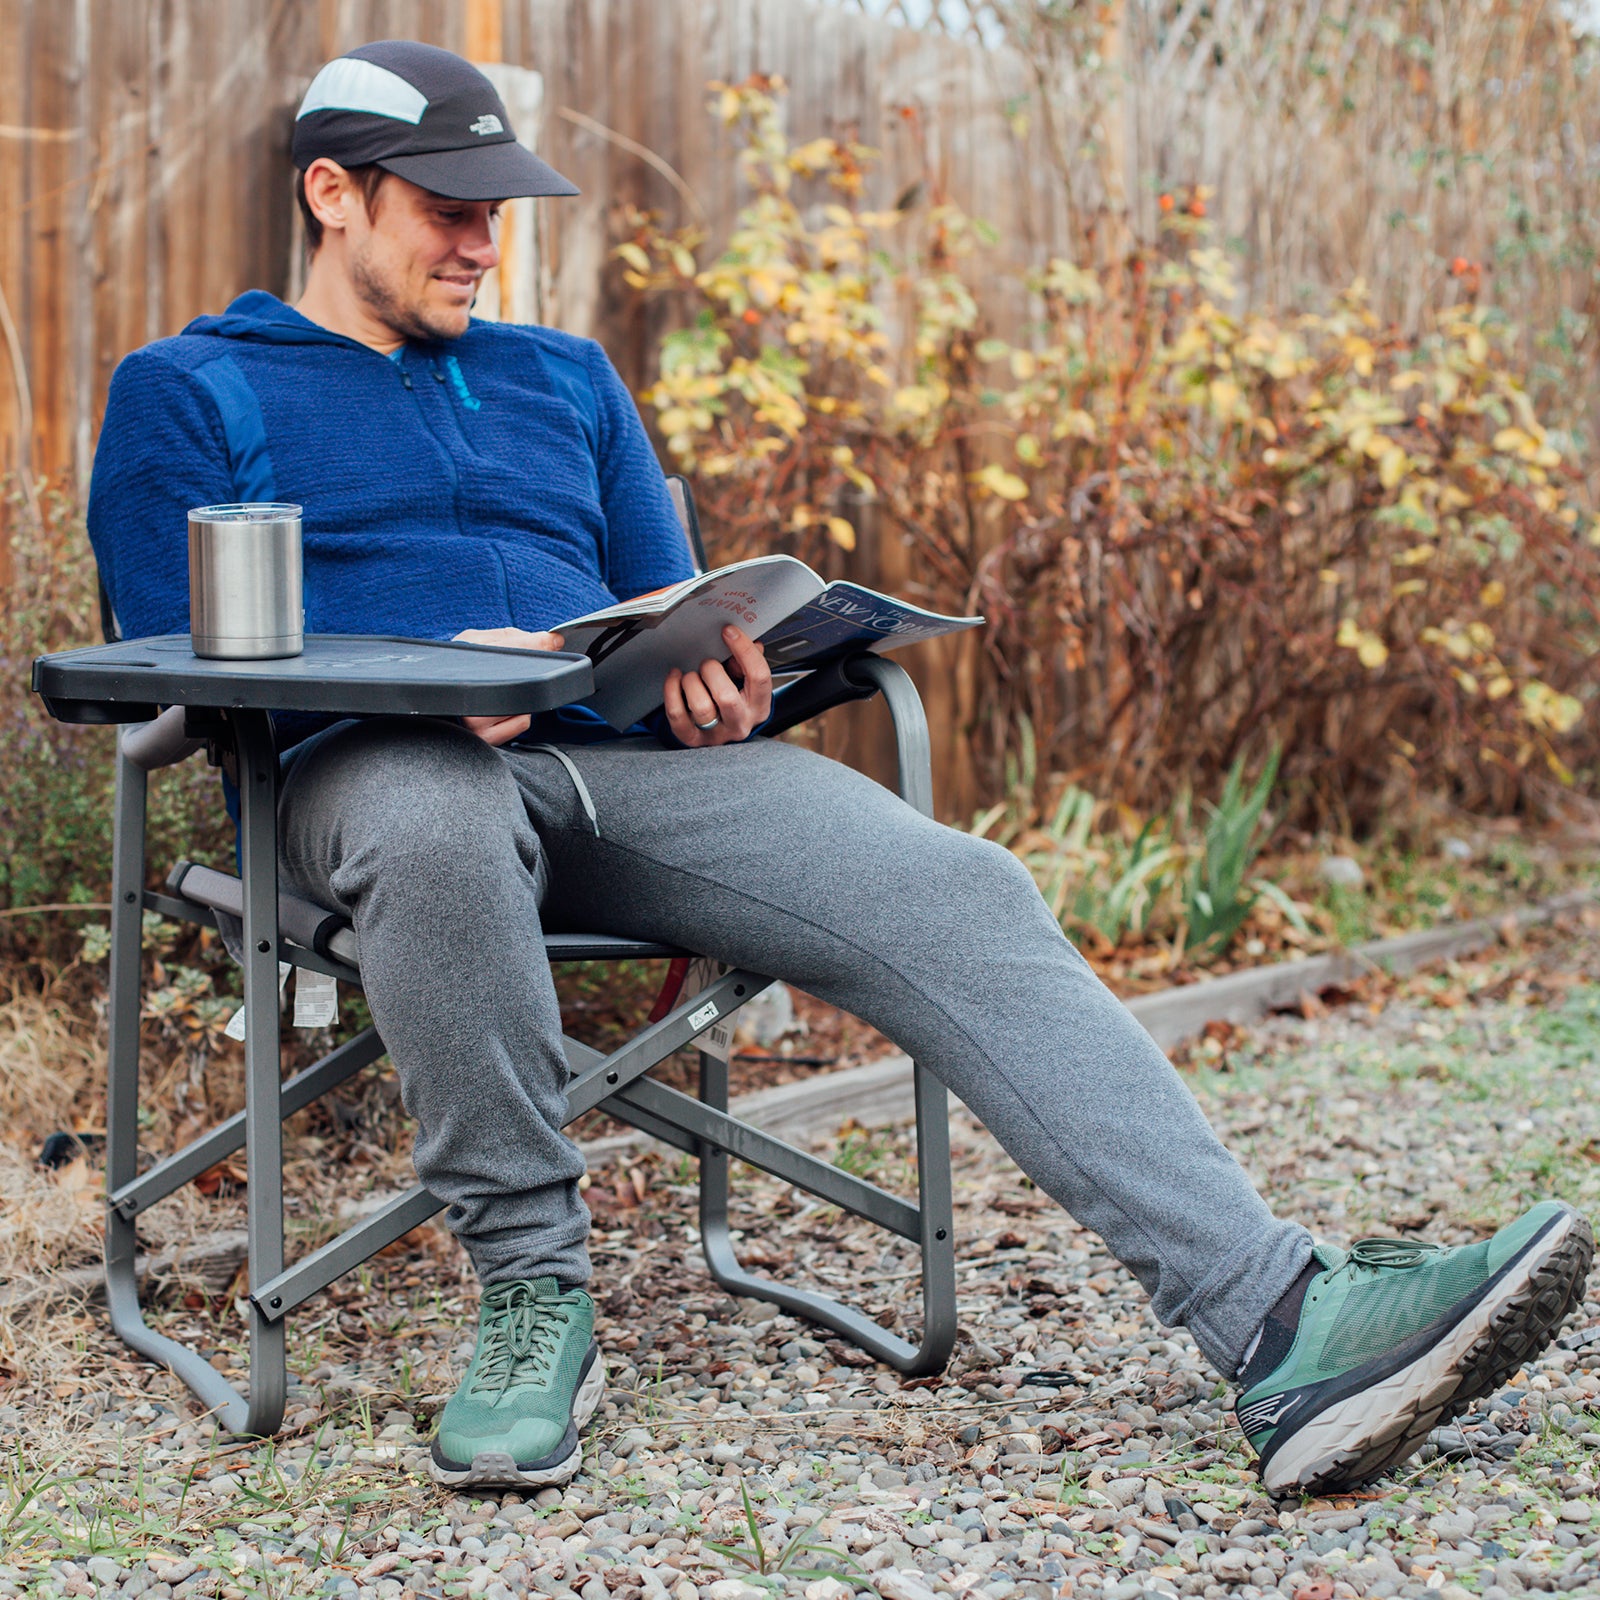 Men's Athleisure Pants to Take You from Couch to Town